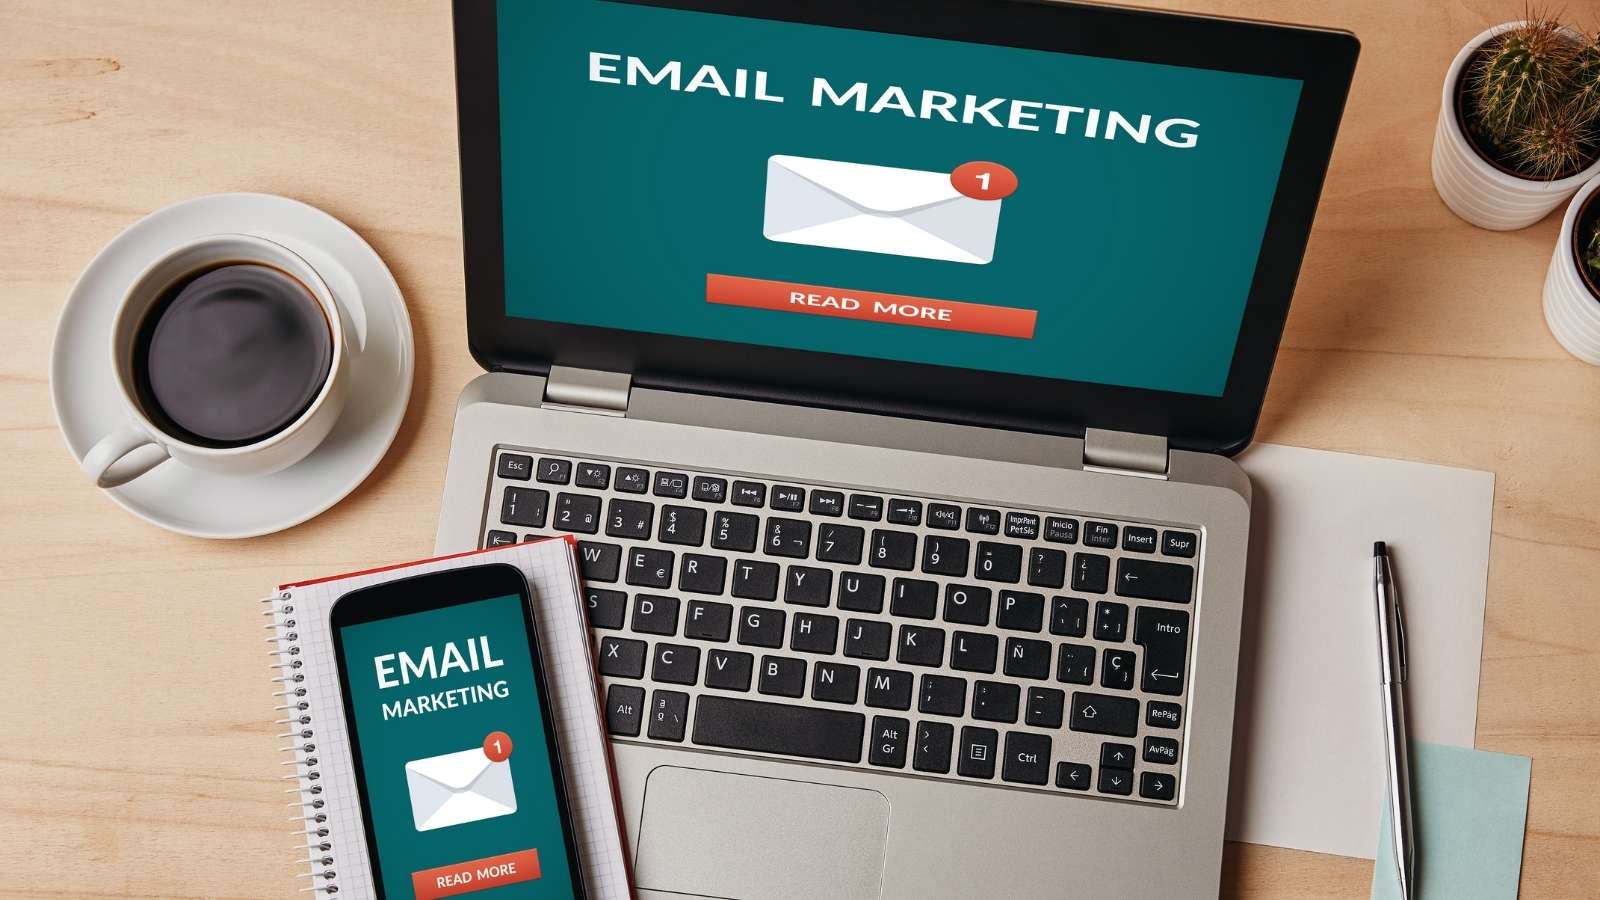 How direct email marketing can help brands increase sales